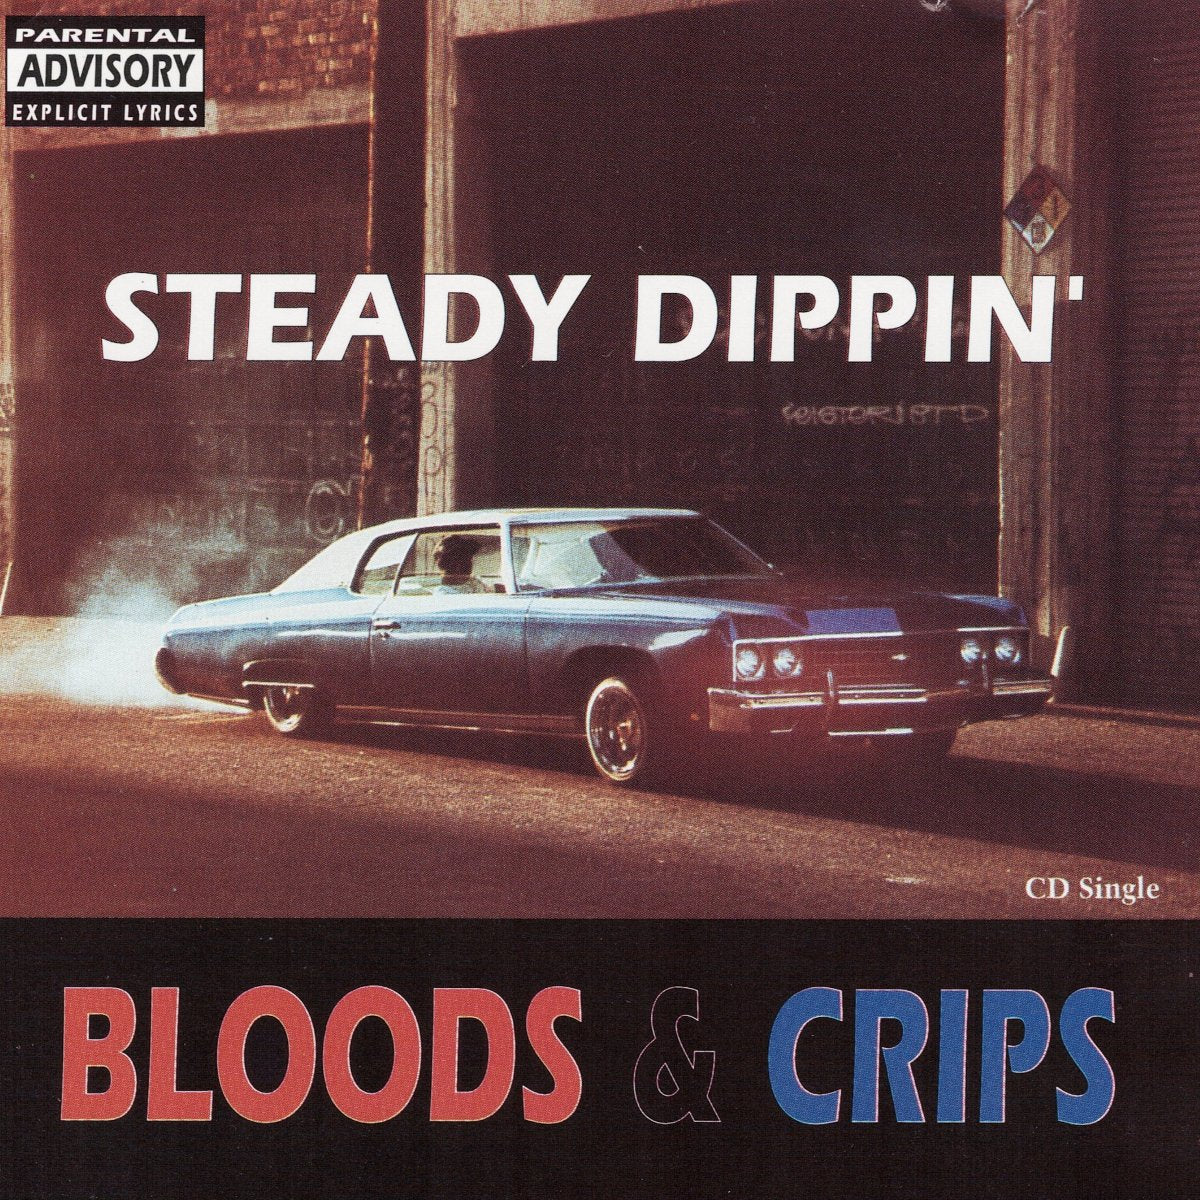 Bloods & Crips - Steady Dippin'